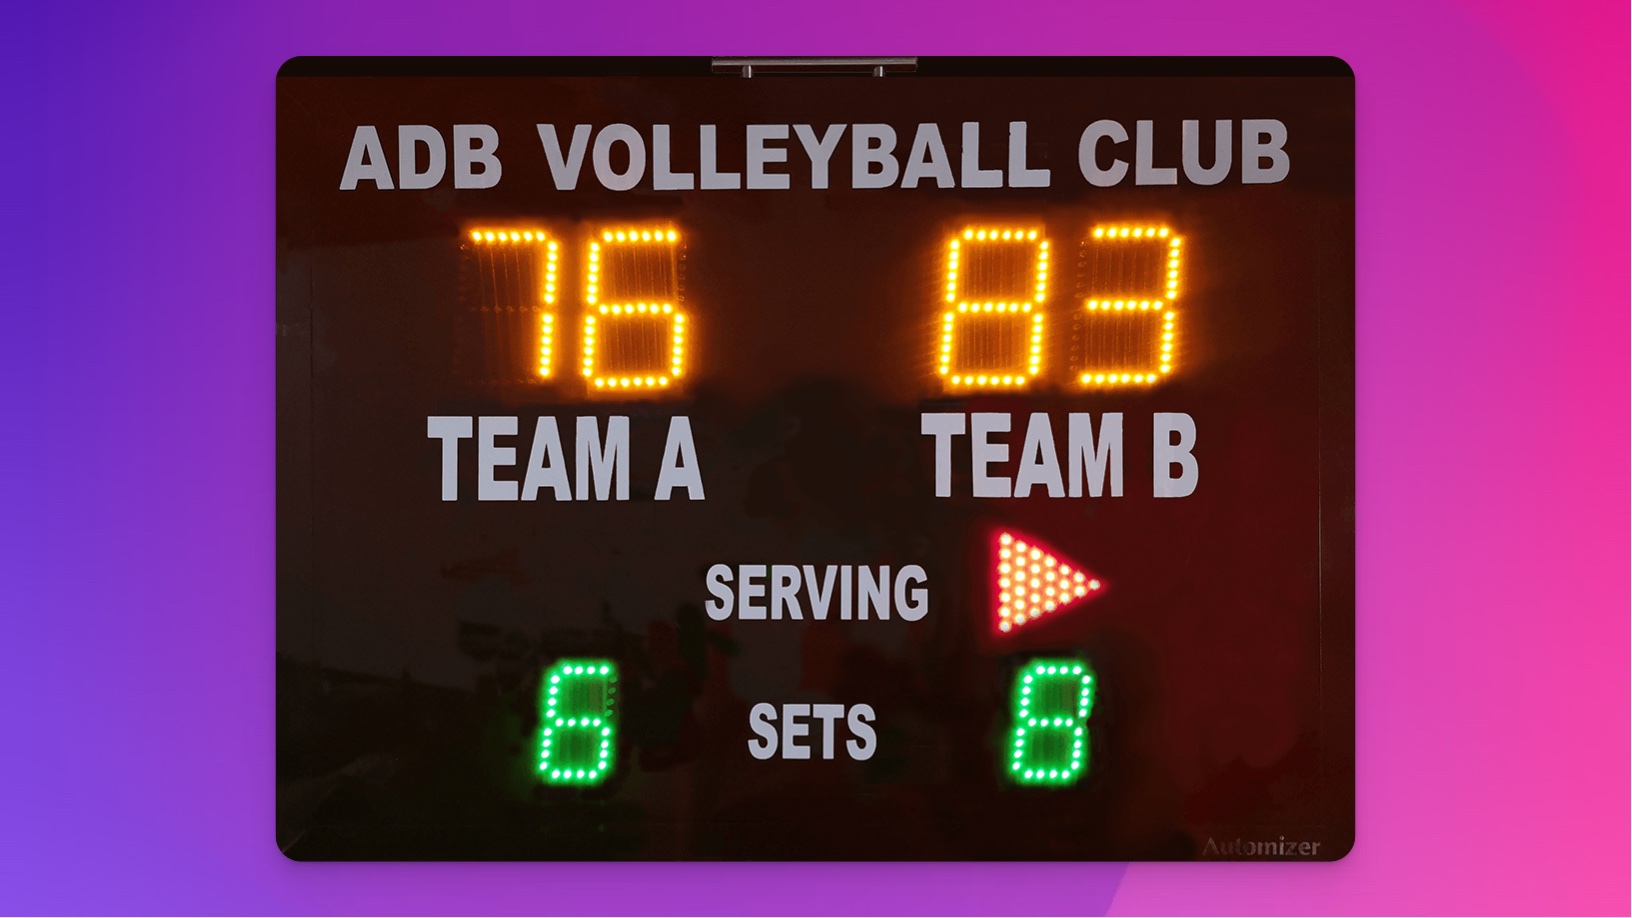 A primer on how points are scored in volleyball. Covers terms like sets and rally scoring. Also includes an explanation of what's shown on a scoreboard.